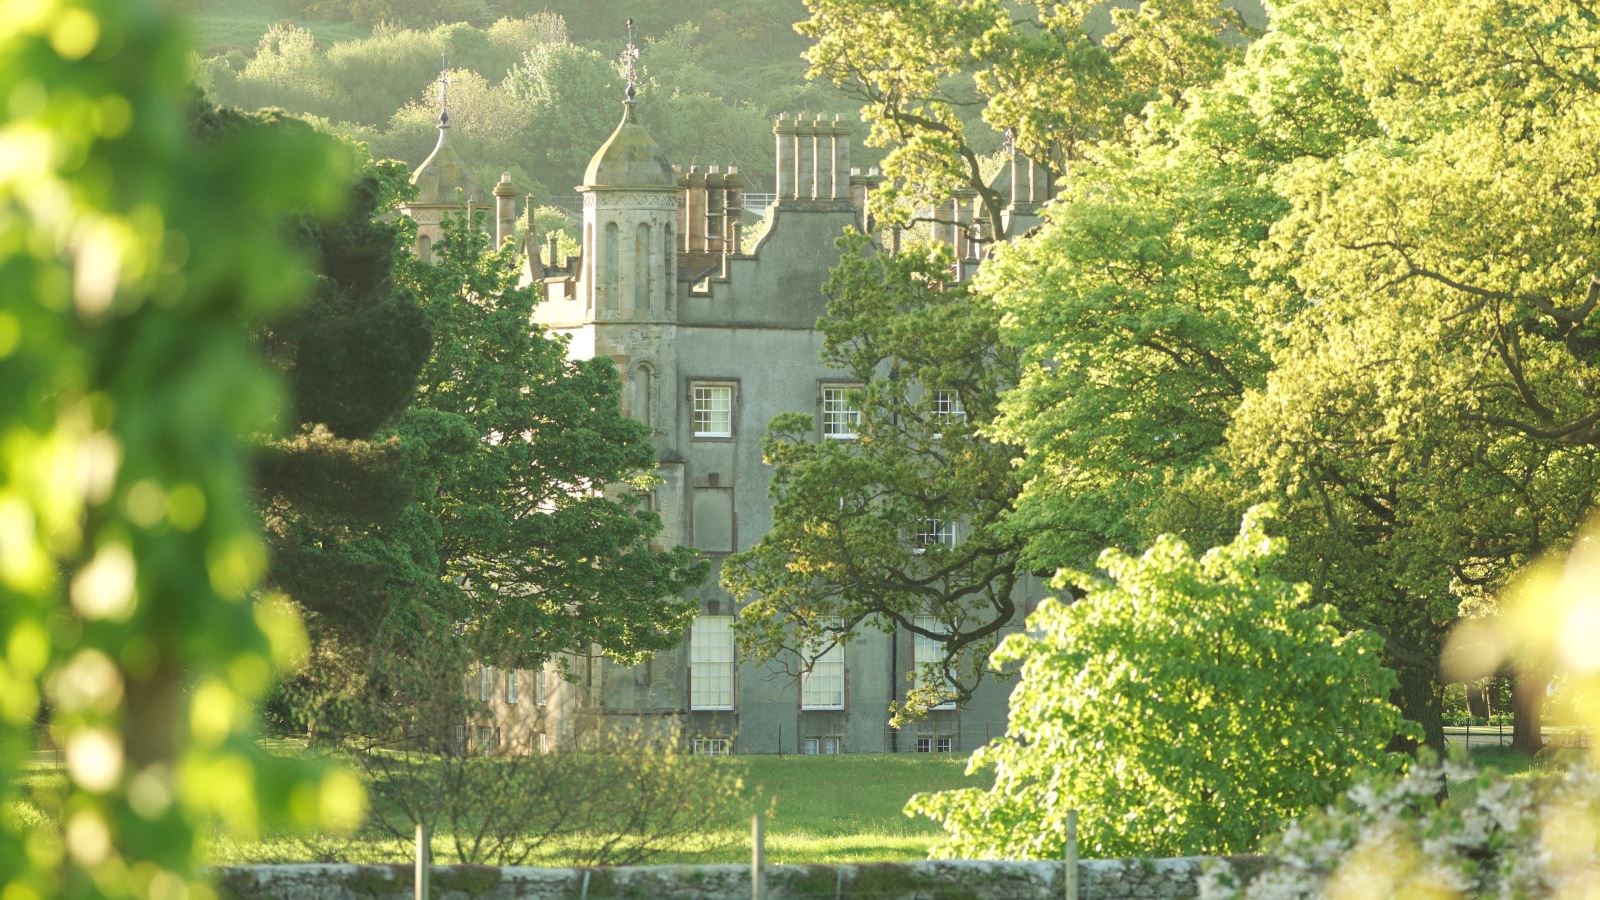 Glenarm Castle in the background surrounded by trees